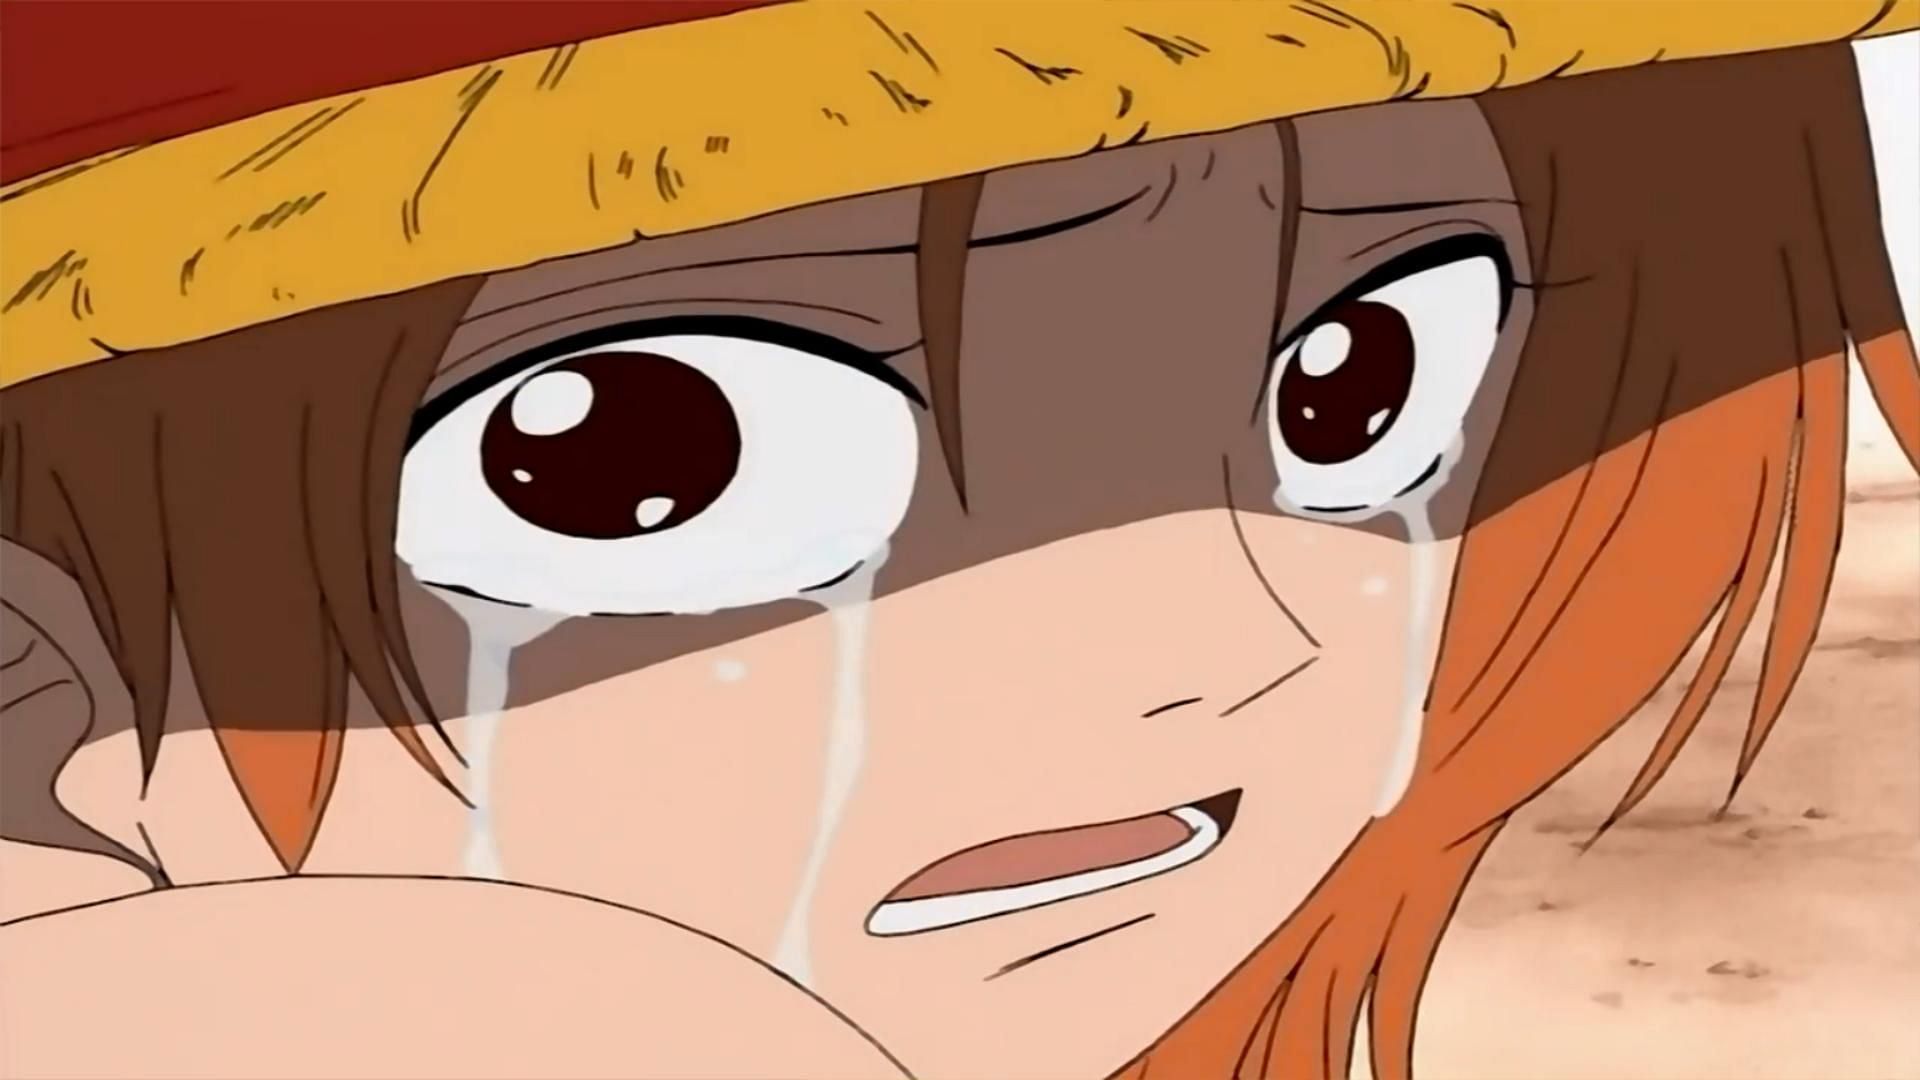 Nami reaches out to Luffy for help (Image via Toei Animation)